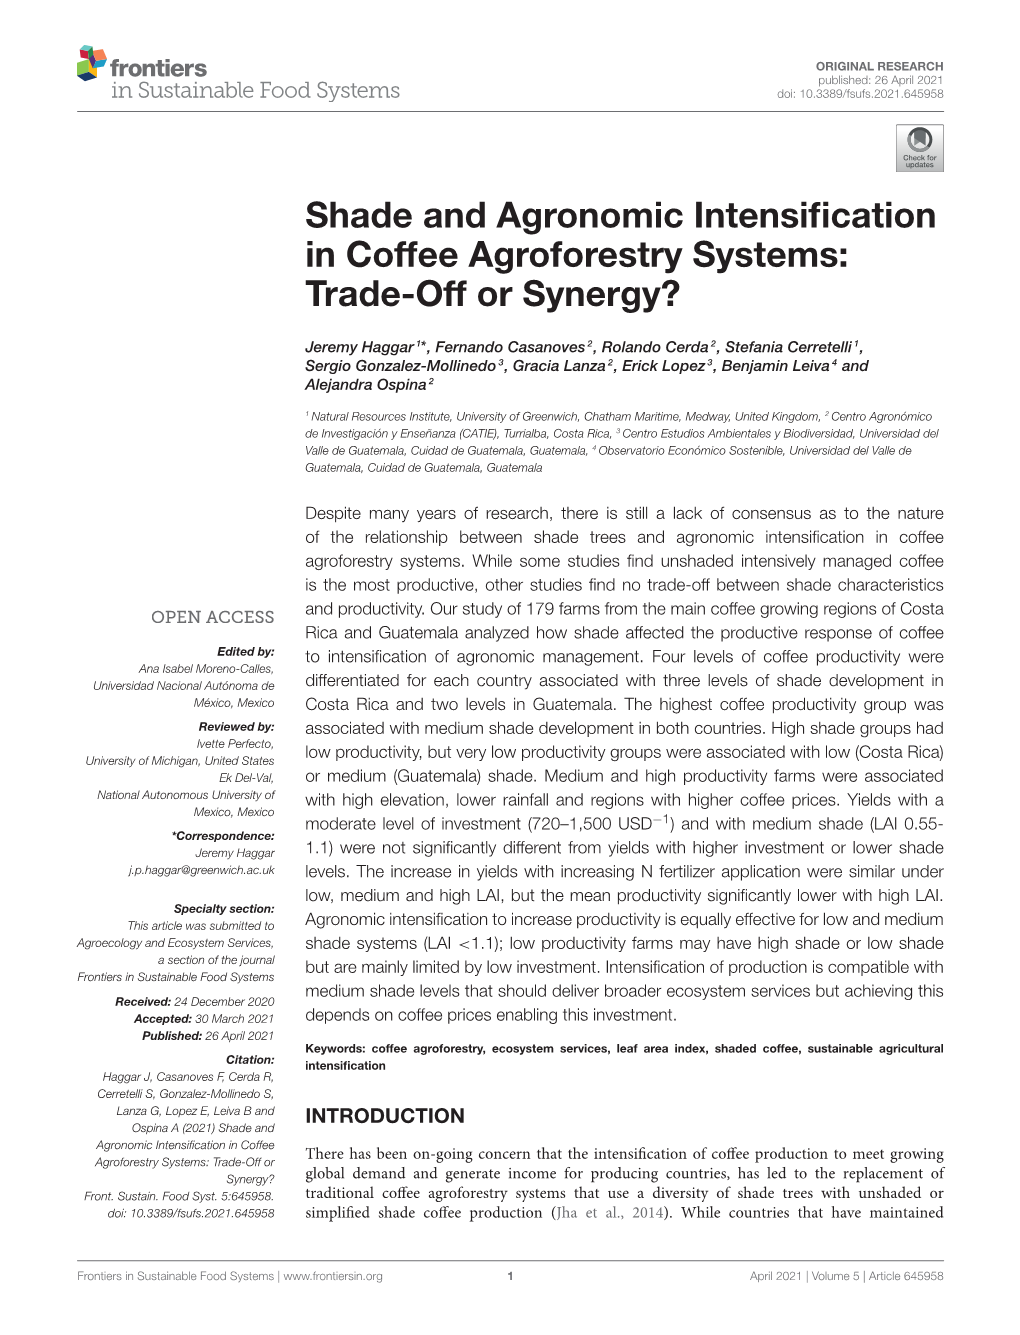 Shade and Agronomic Intensification in Coffee Agroforestry Systems